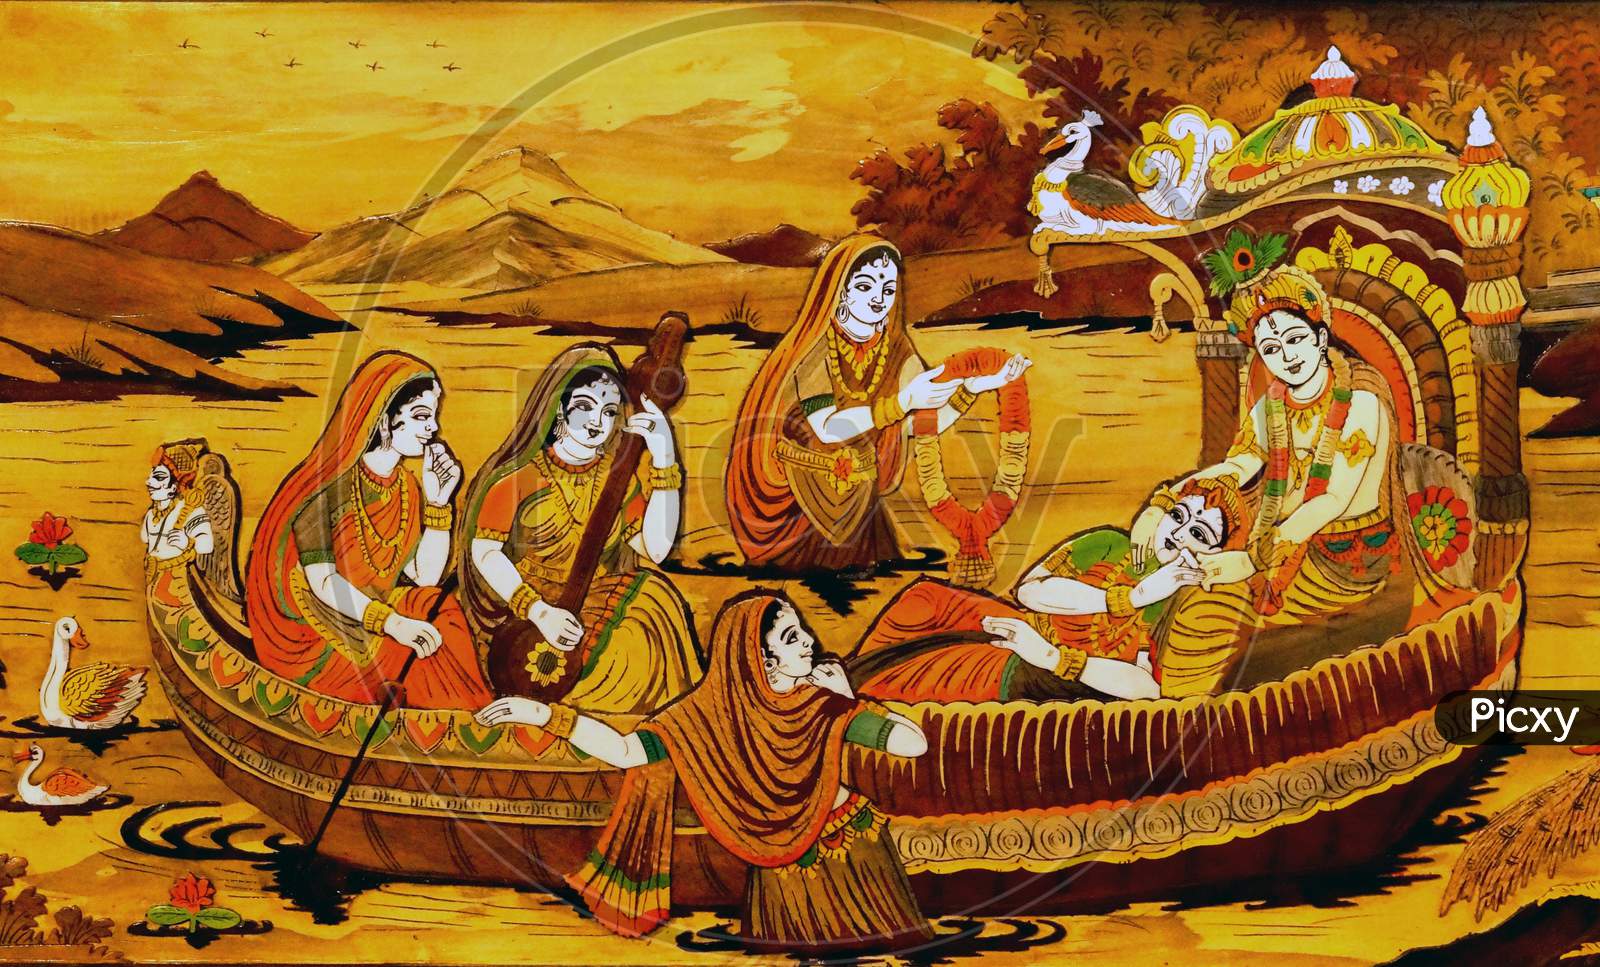 Wooden Painting Of Indian God And Goddess Radha And Krishna In Boat In A Temple